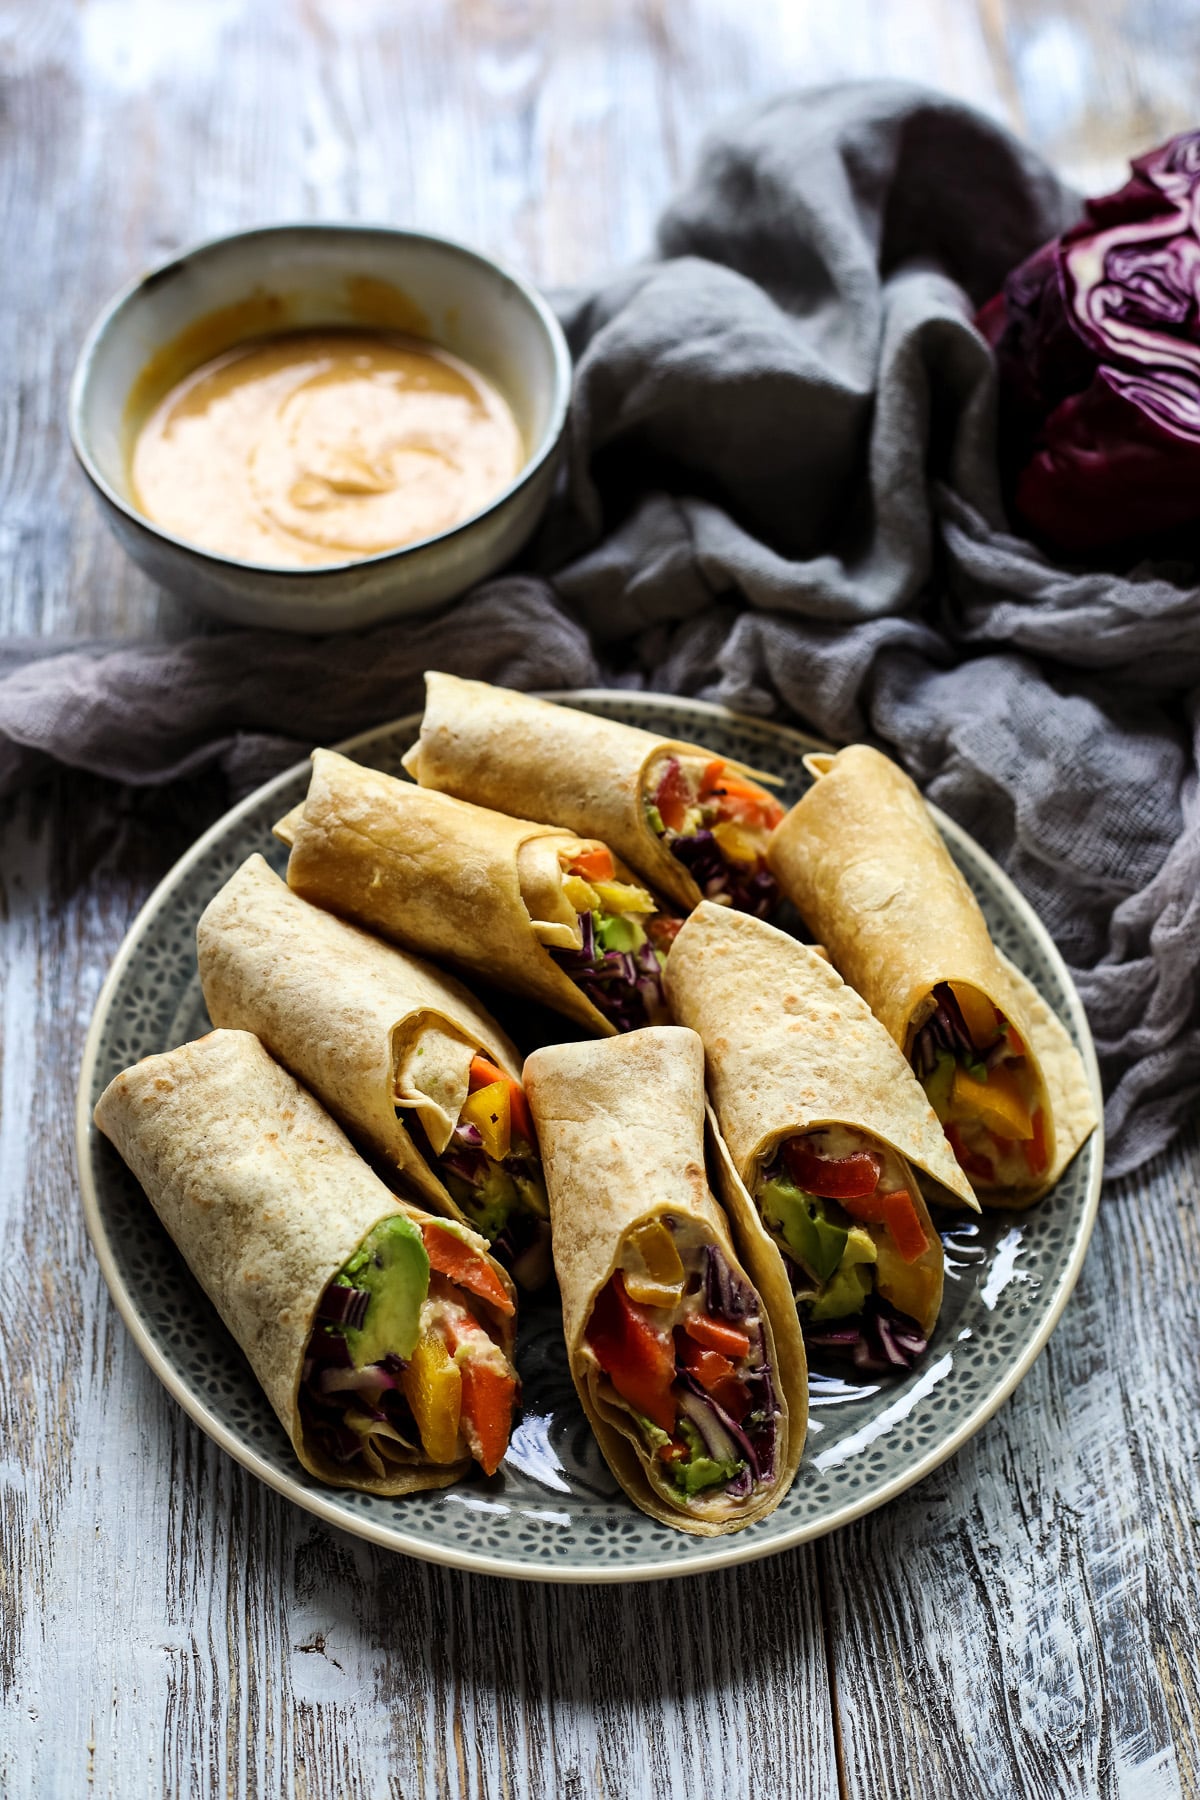 Rainbow wraps with hummus on a plate.